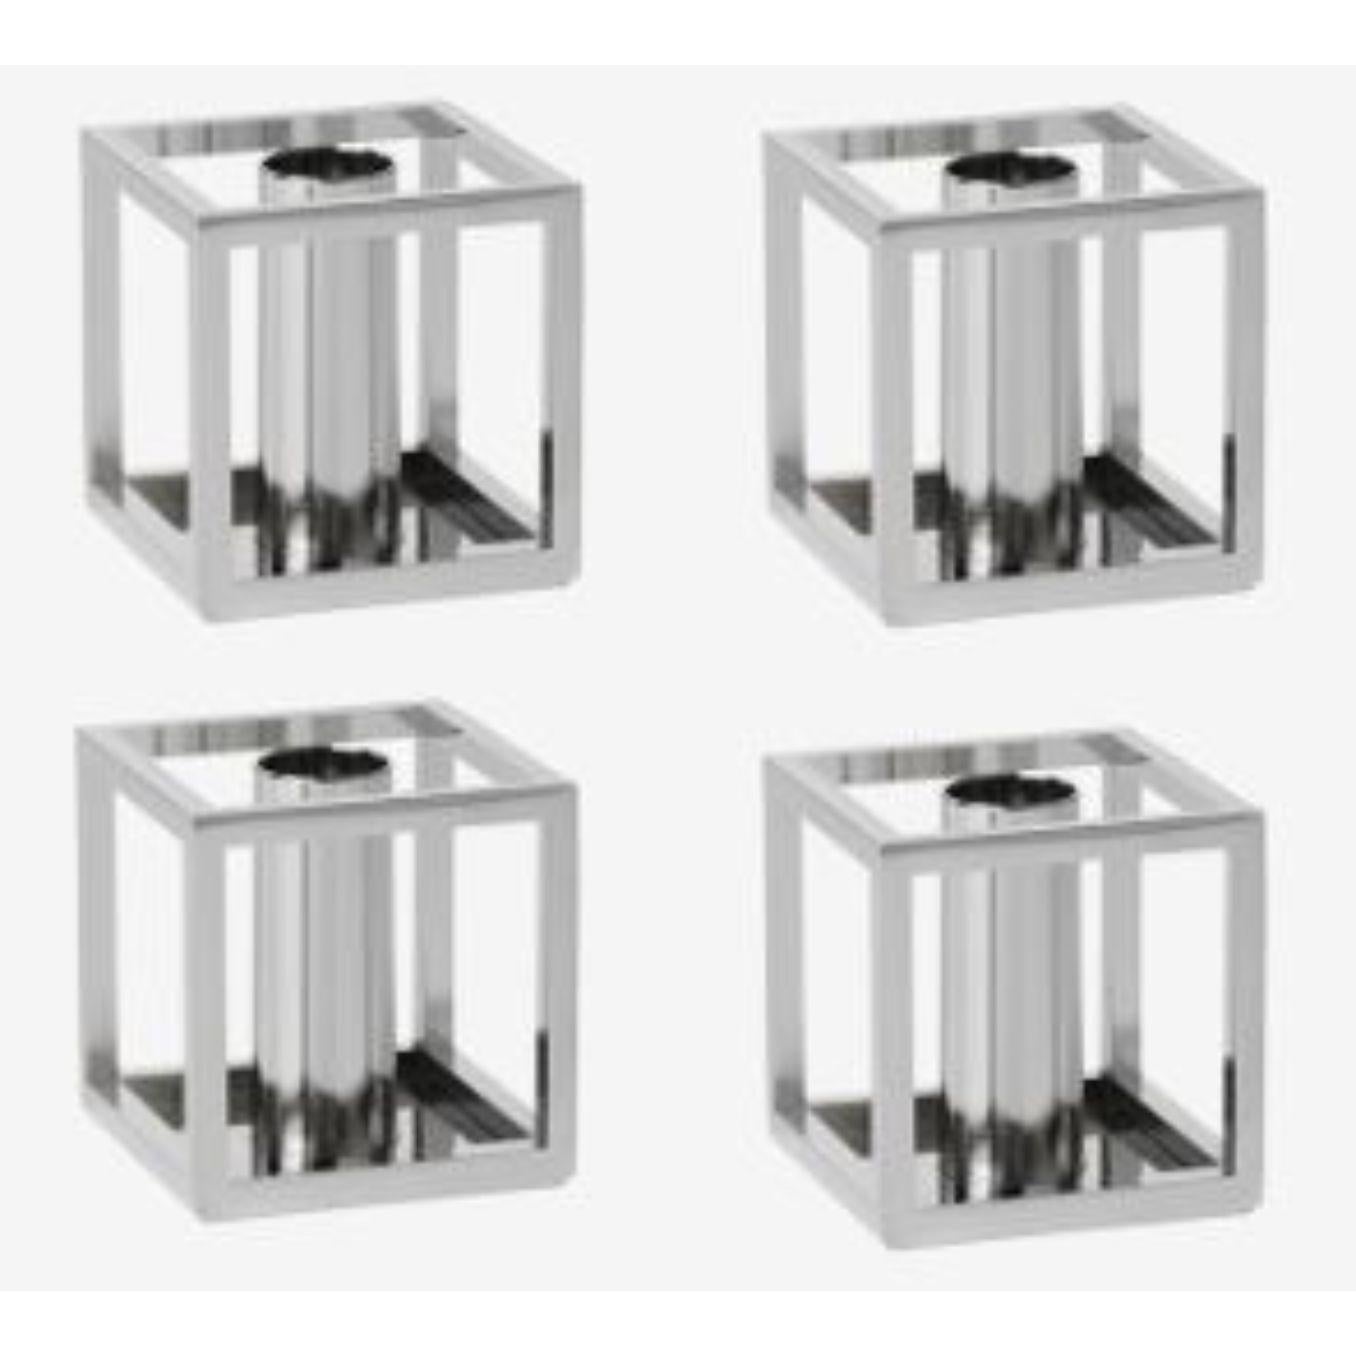 Set of 4 nickel plated kubus 1 candle holders by Lassen
Dimensions: D 7 x W 7 x H 7 cm 
Materials: Metal 
Also available in different dimensions. 
Weight: 0.40 Kg

A new small wonder has seen the light of day. Kubus Micro is a stylish, smaller